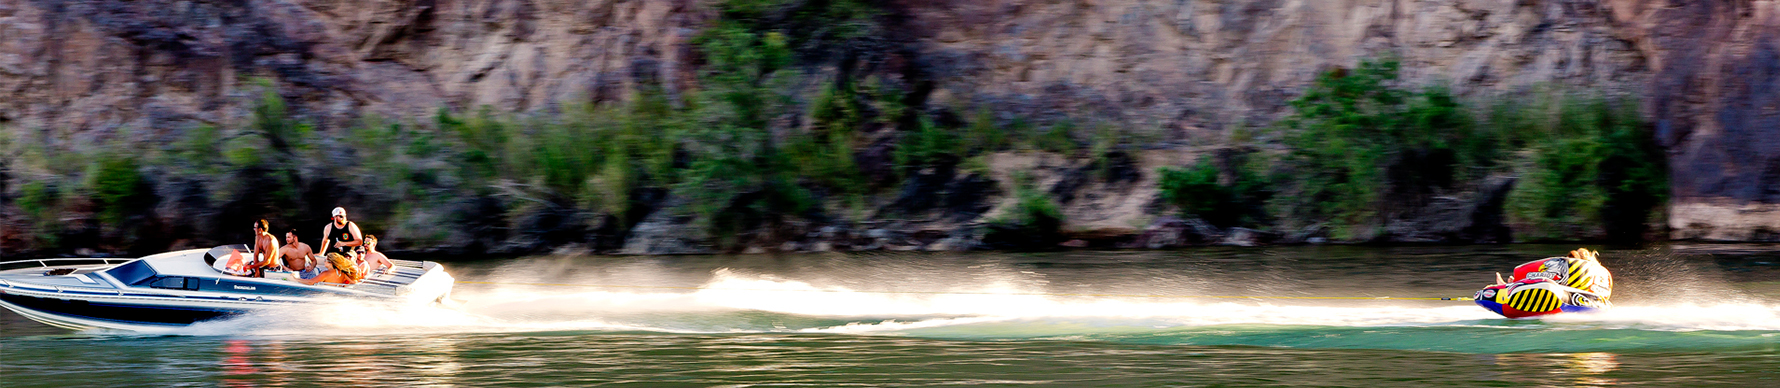 Water sprays as a speedboat pulls someone on a tube in the green water of the Colorado River.